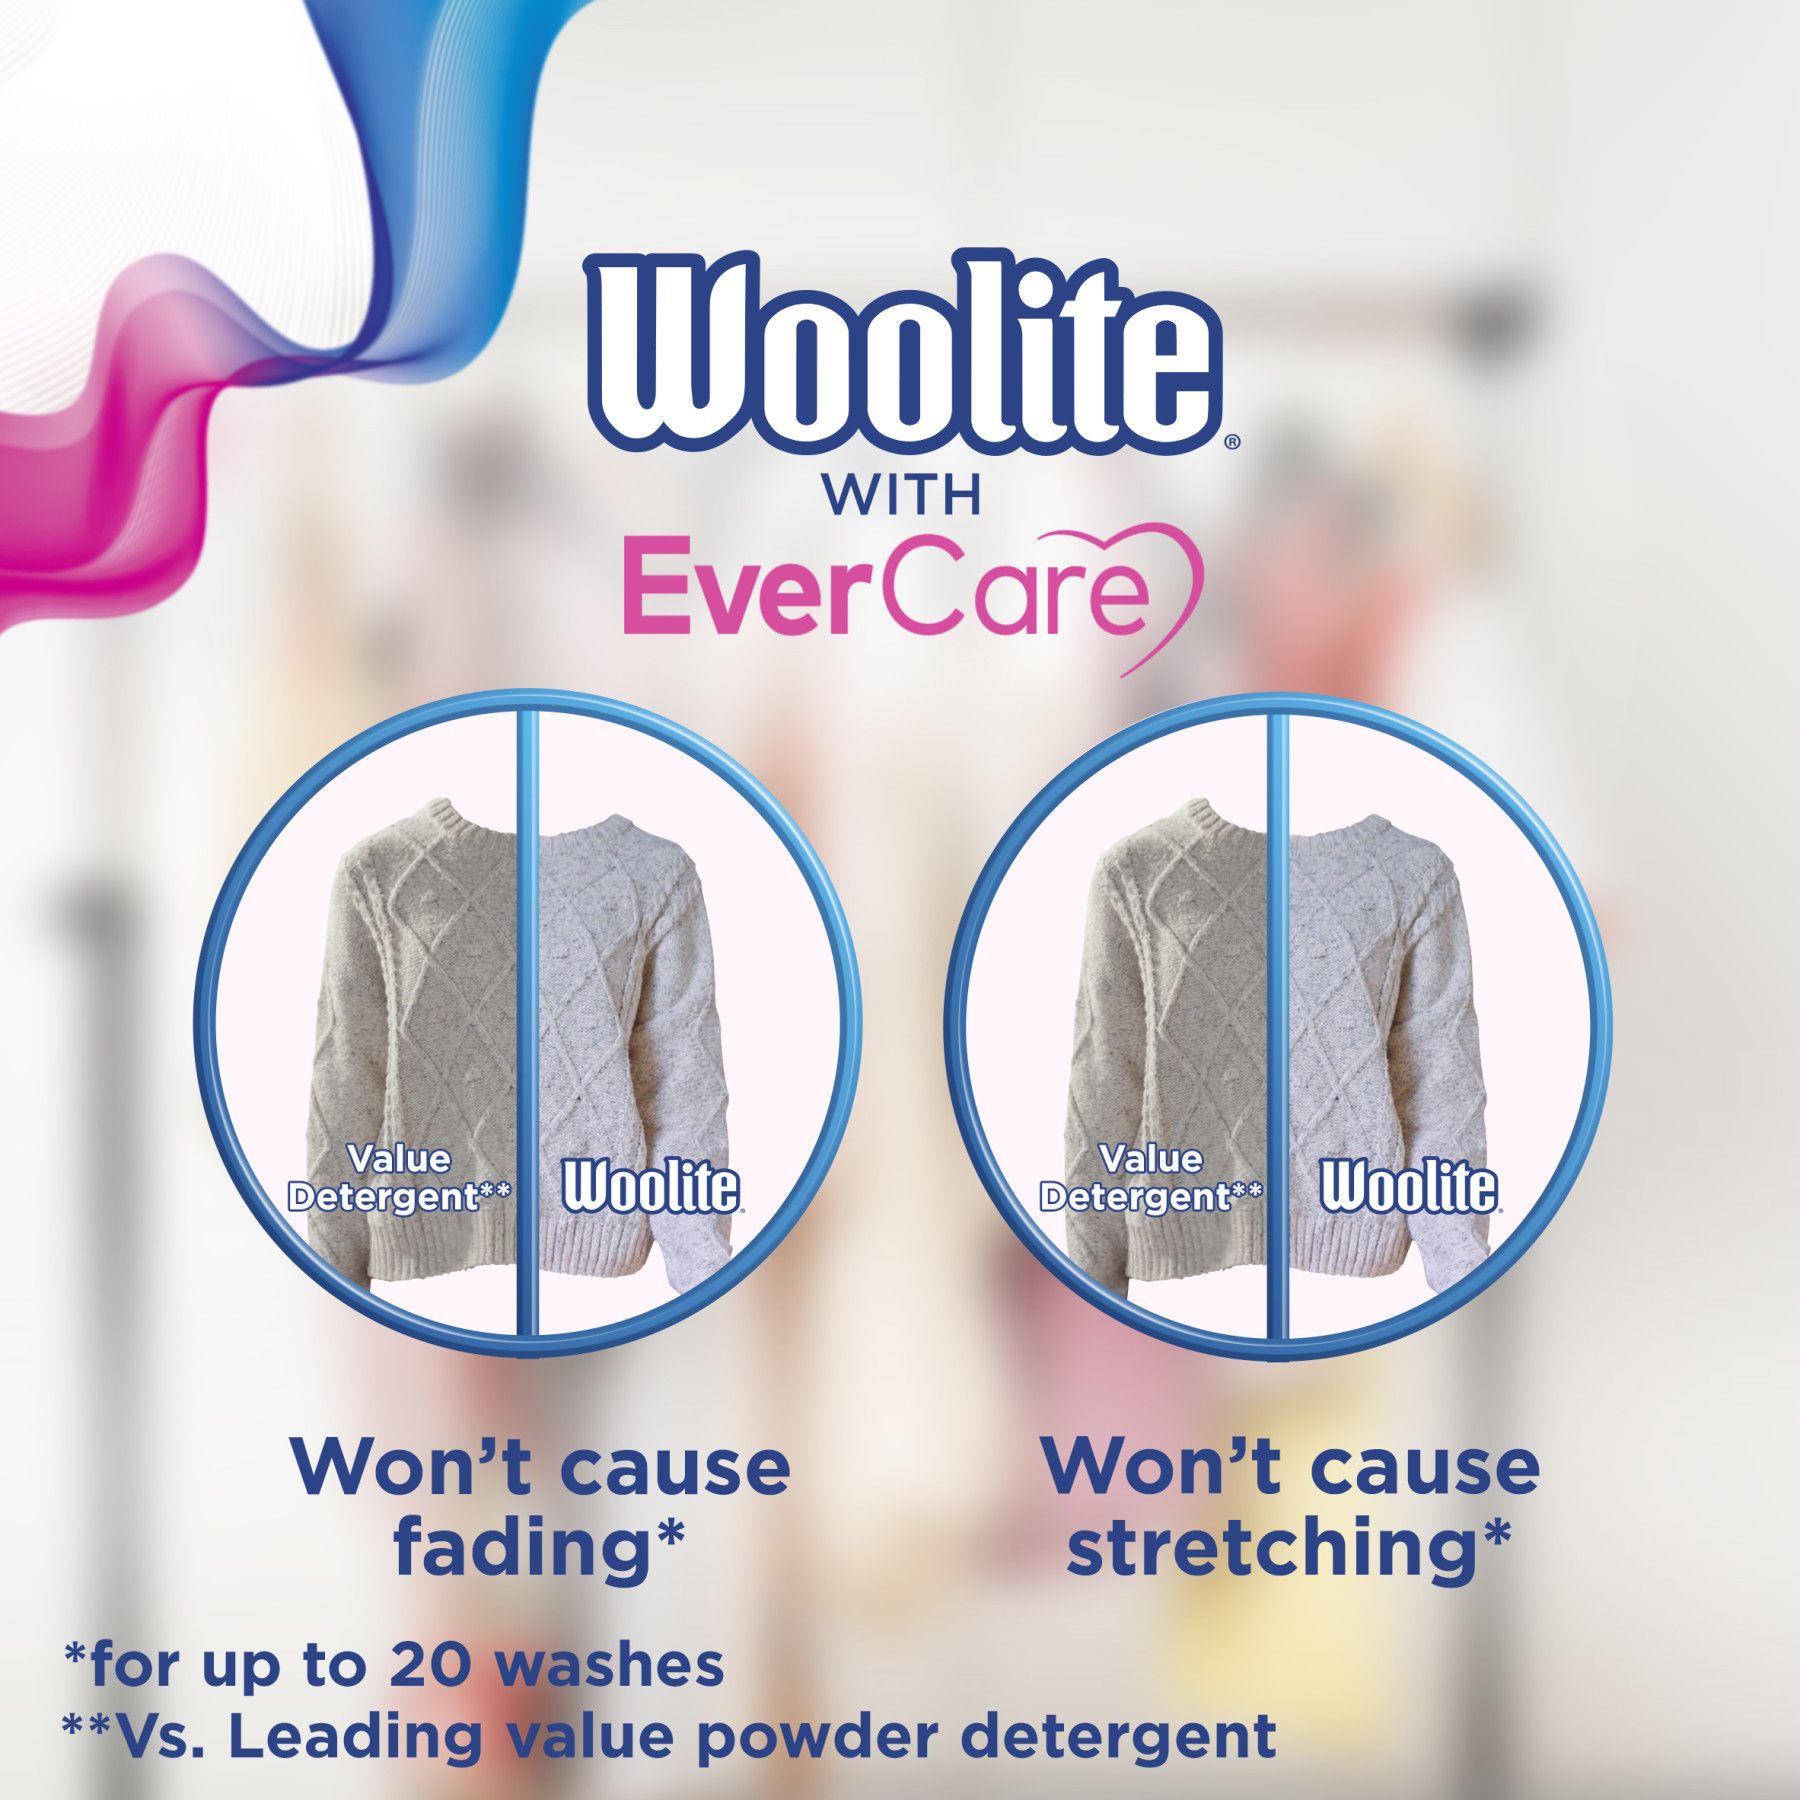 Woolite All Clothes Liquid Laundry Detergent, Sparkling Falls Scent, 83 Loads , 125oz, Regular & HE Washers, Gentle Cycle, , Packaging May Vary - image 3 of 6